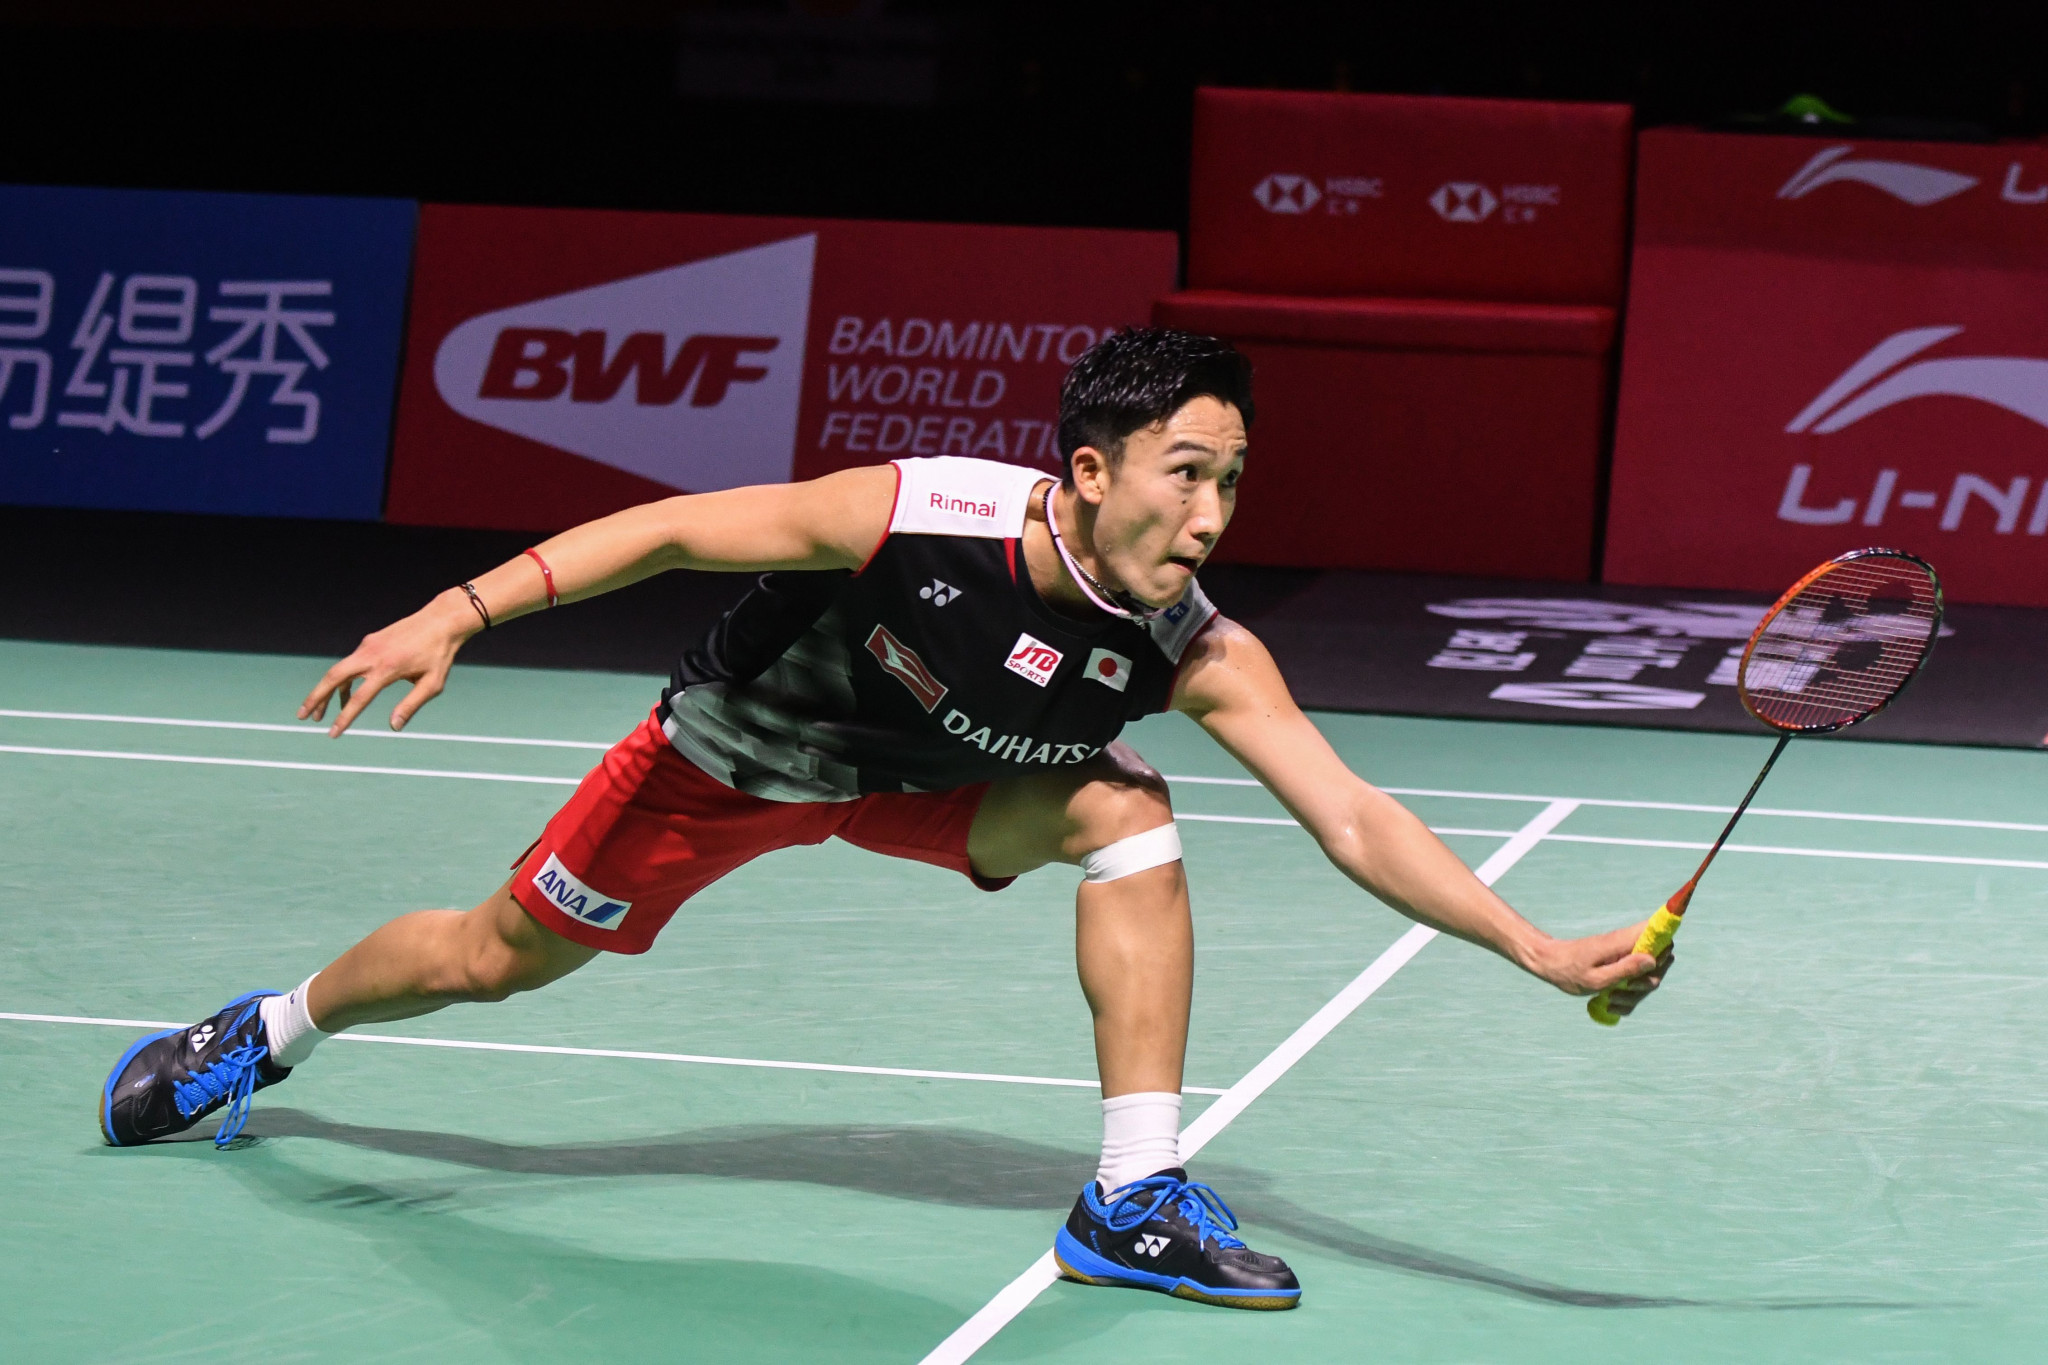 Kento Momota, Japan's world number one, has a point to prove at the BWF World Tour Finals in Guangzhou ©Getty Images